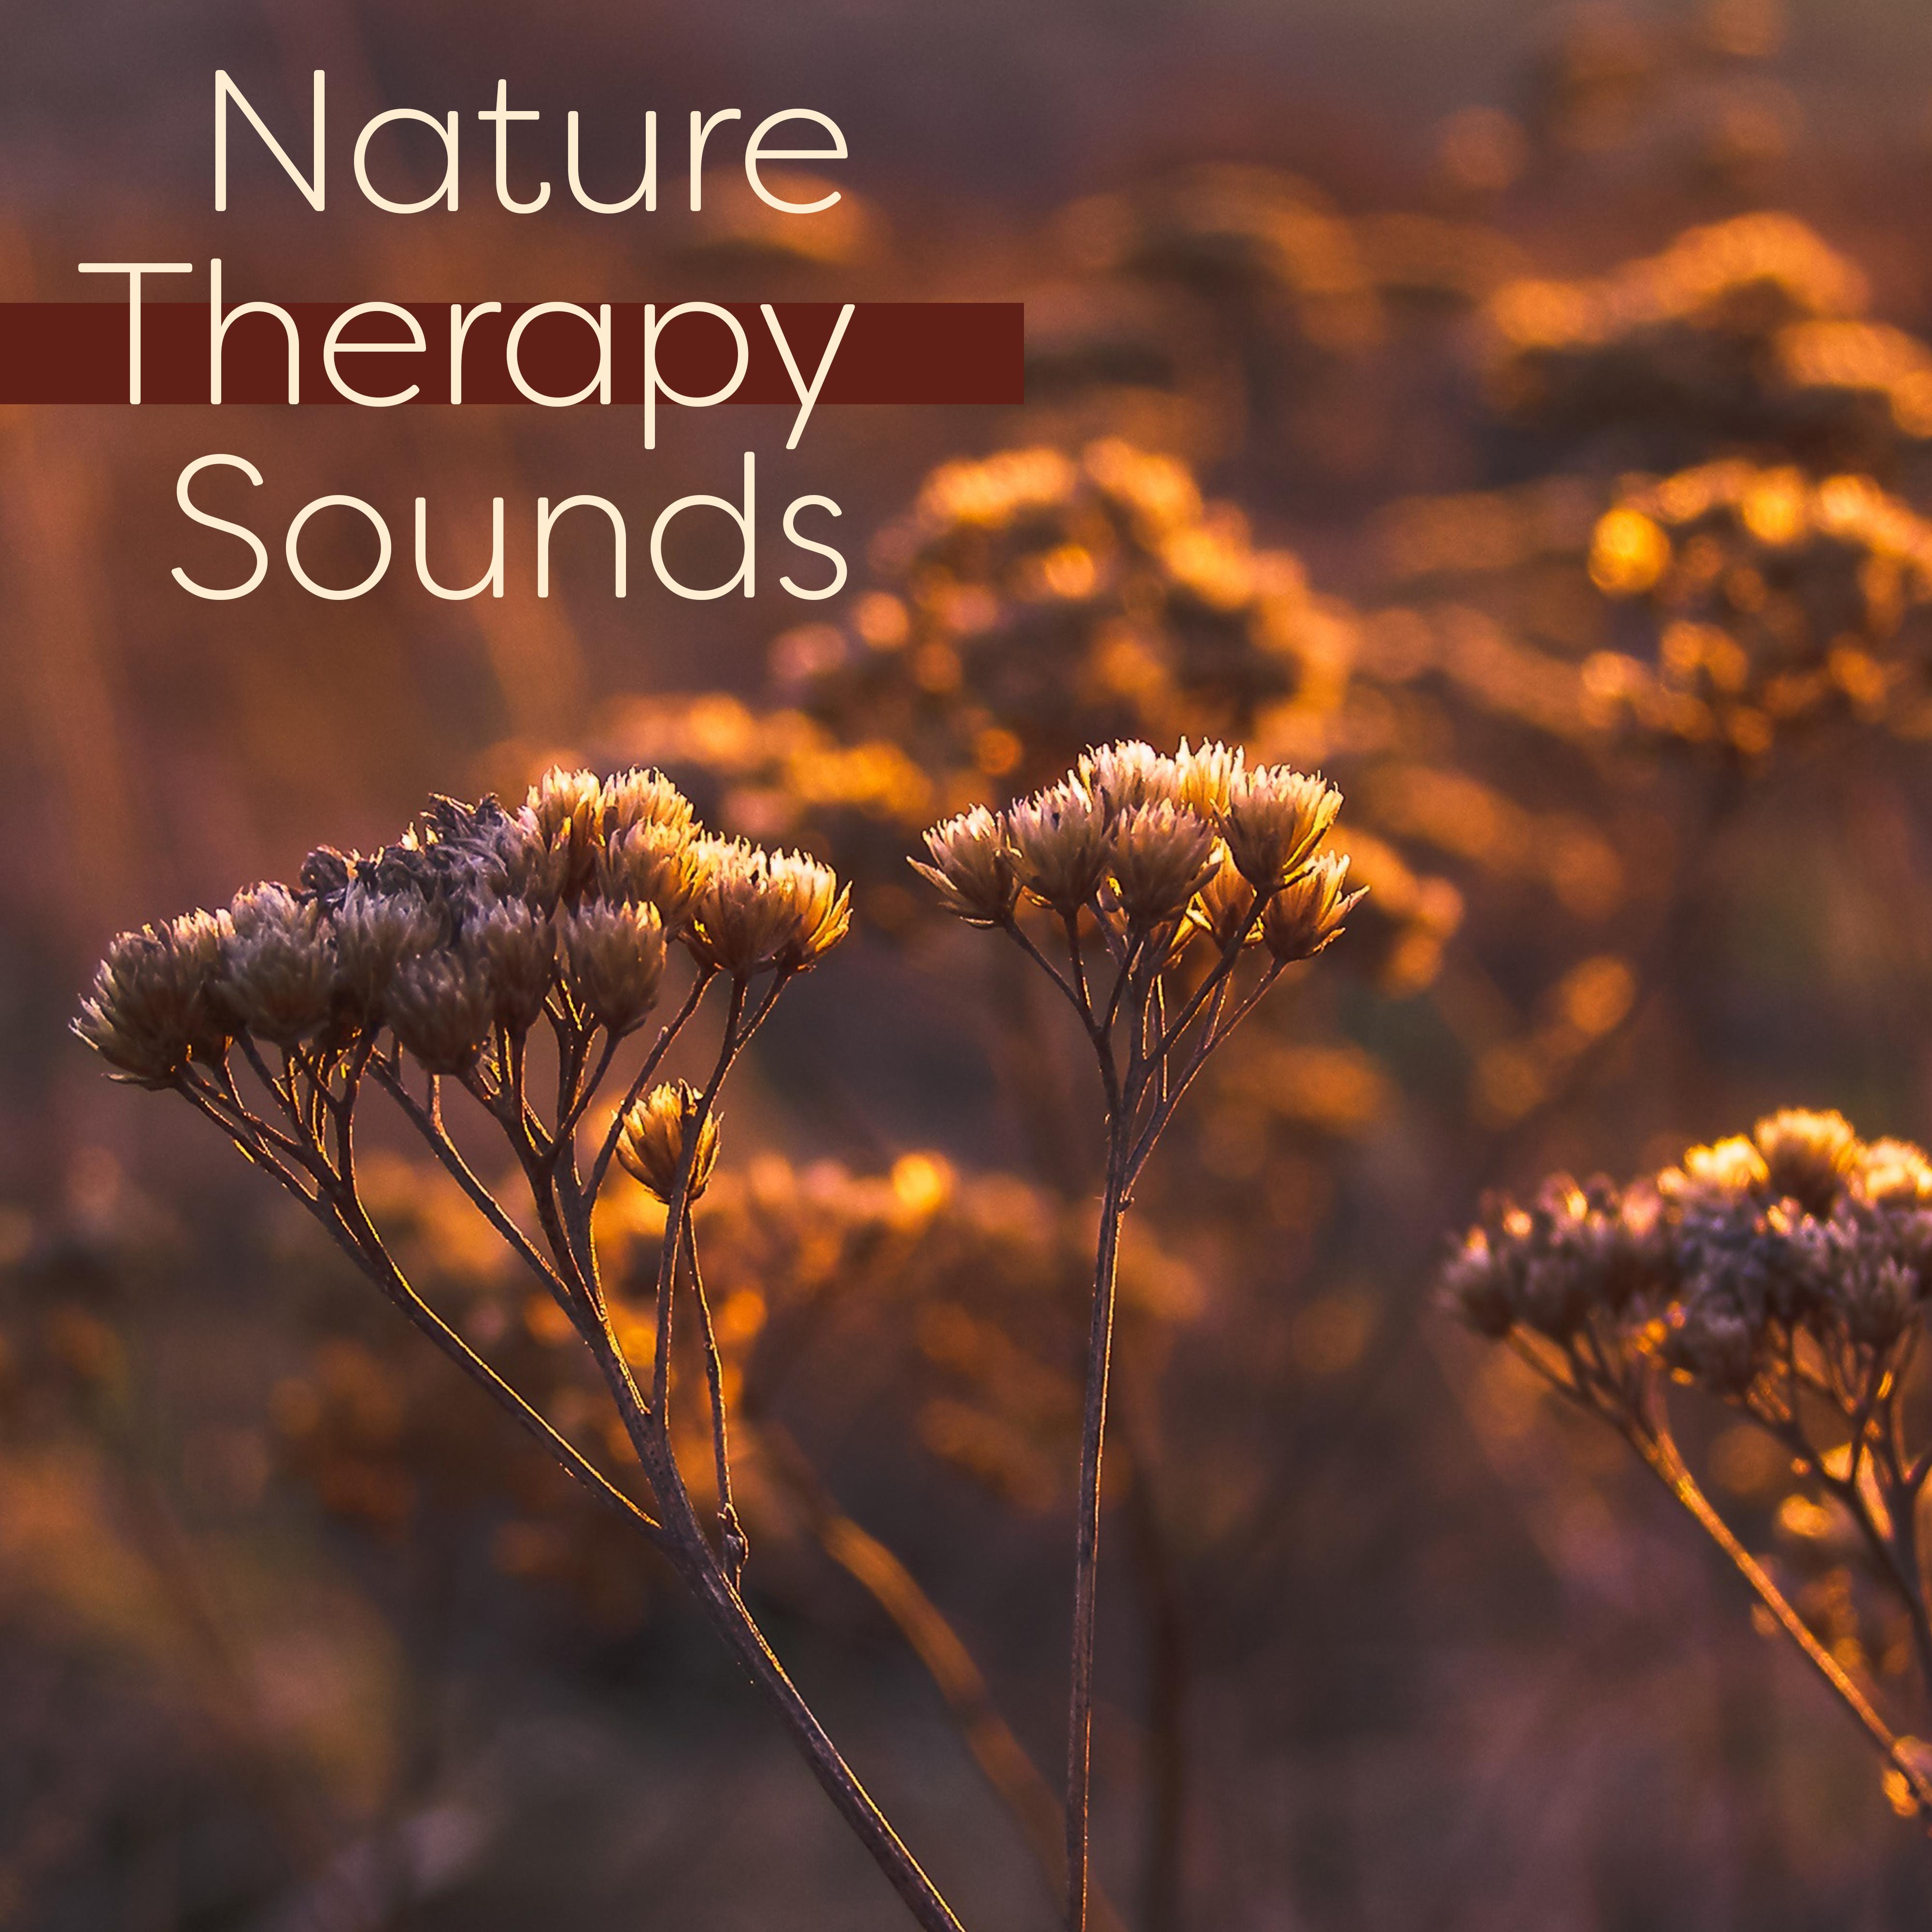 Nature Therapy Sounds  Music to Rest, Spirit Relaxation, Healing Waves